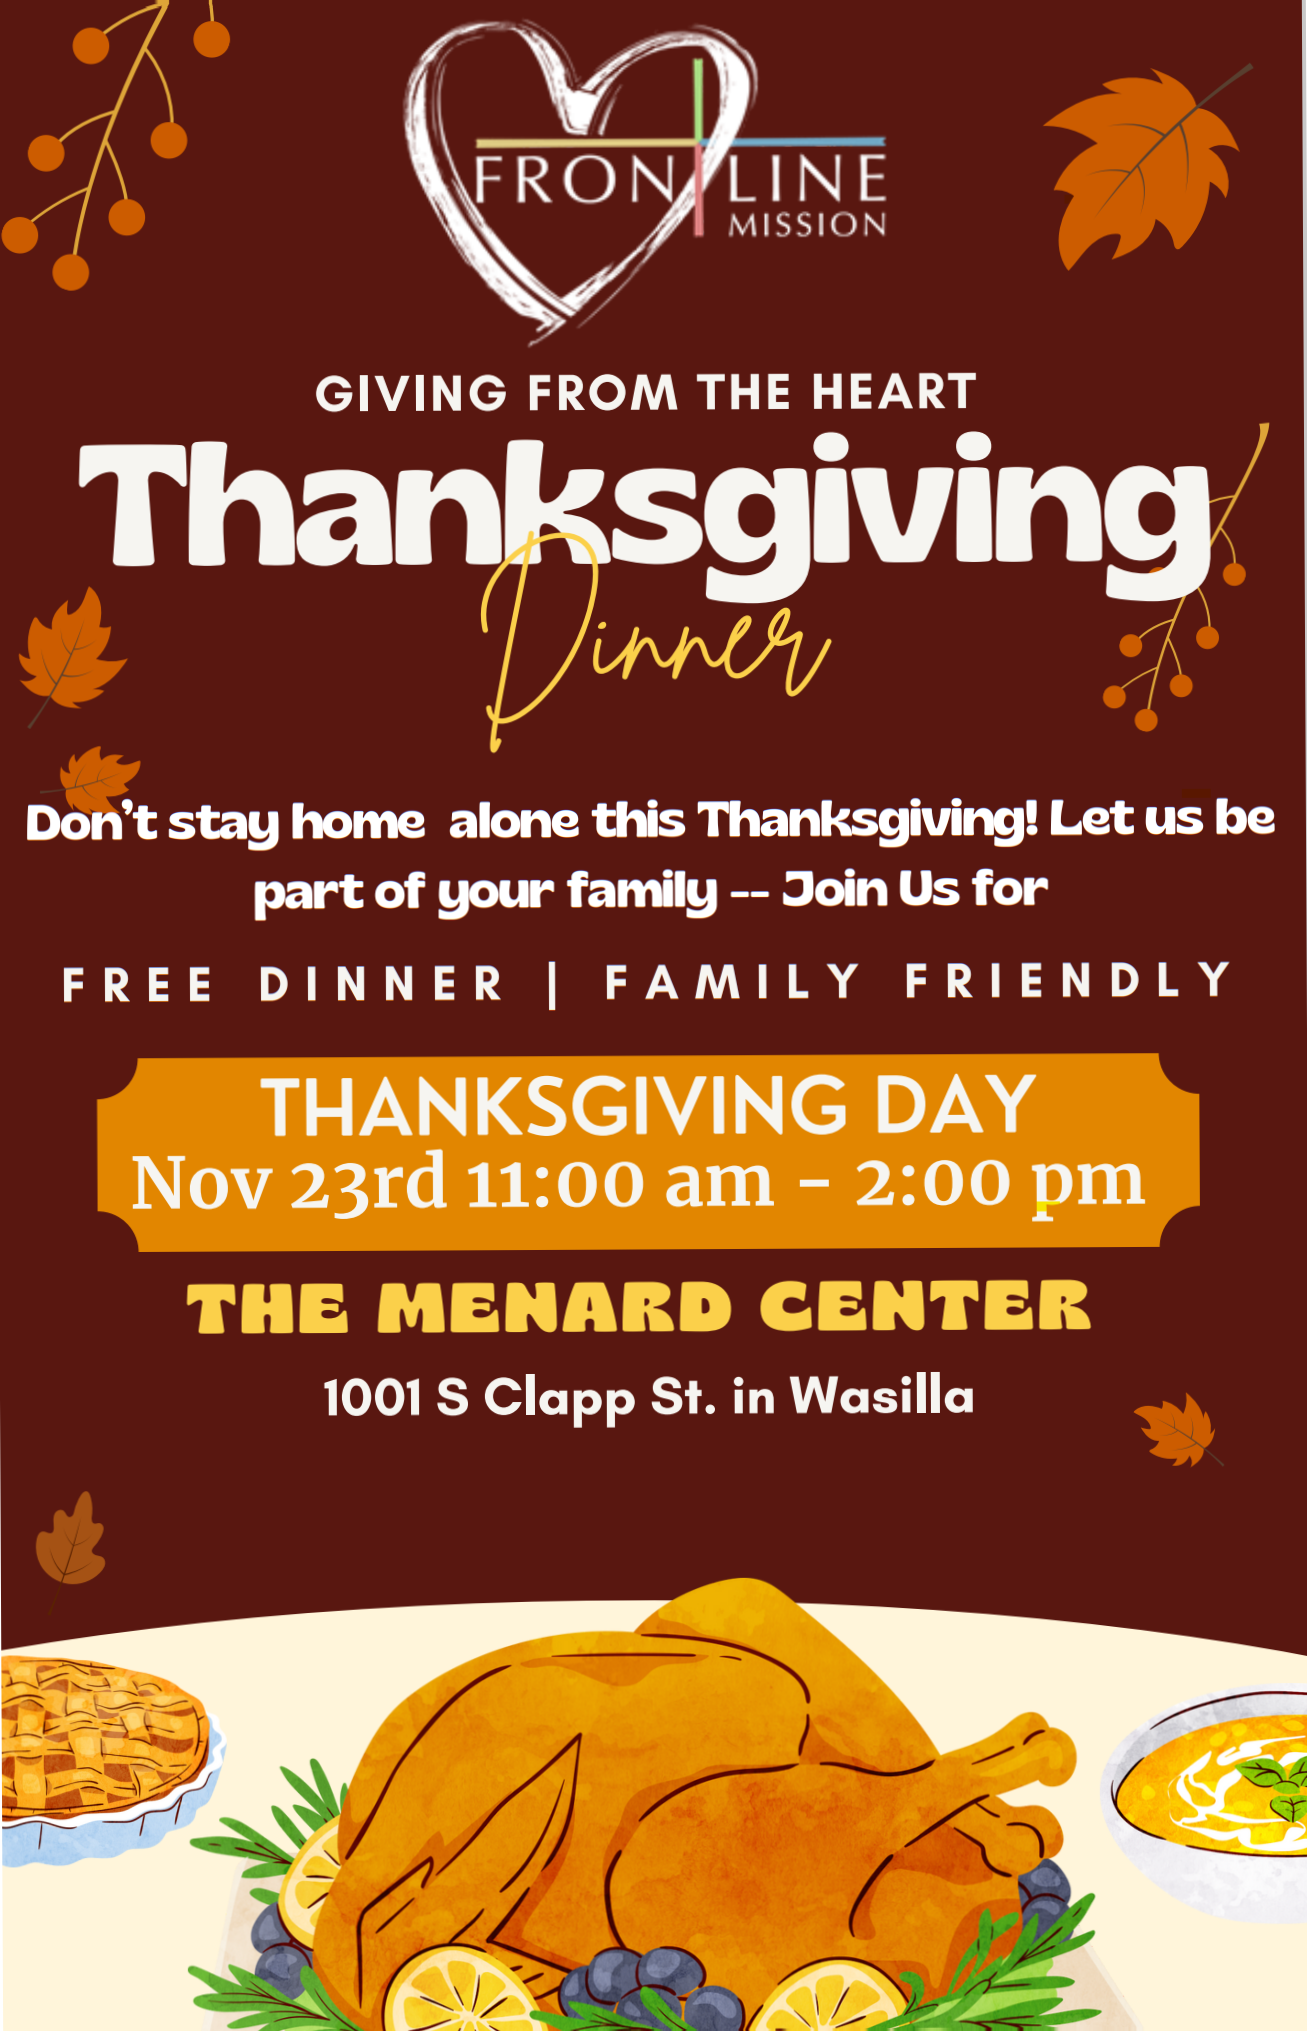 Flyer for free community Thanksgiving dinner event hosted by Frontline Mission